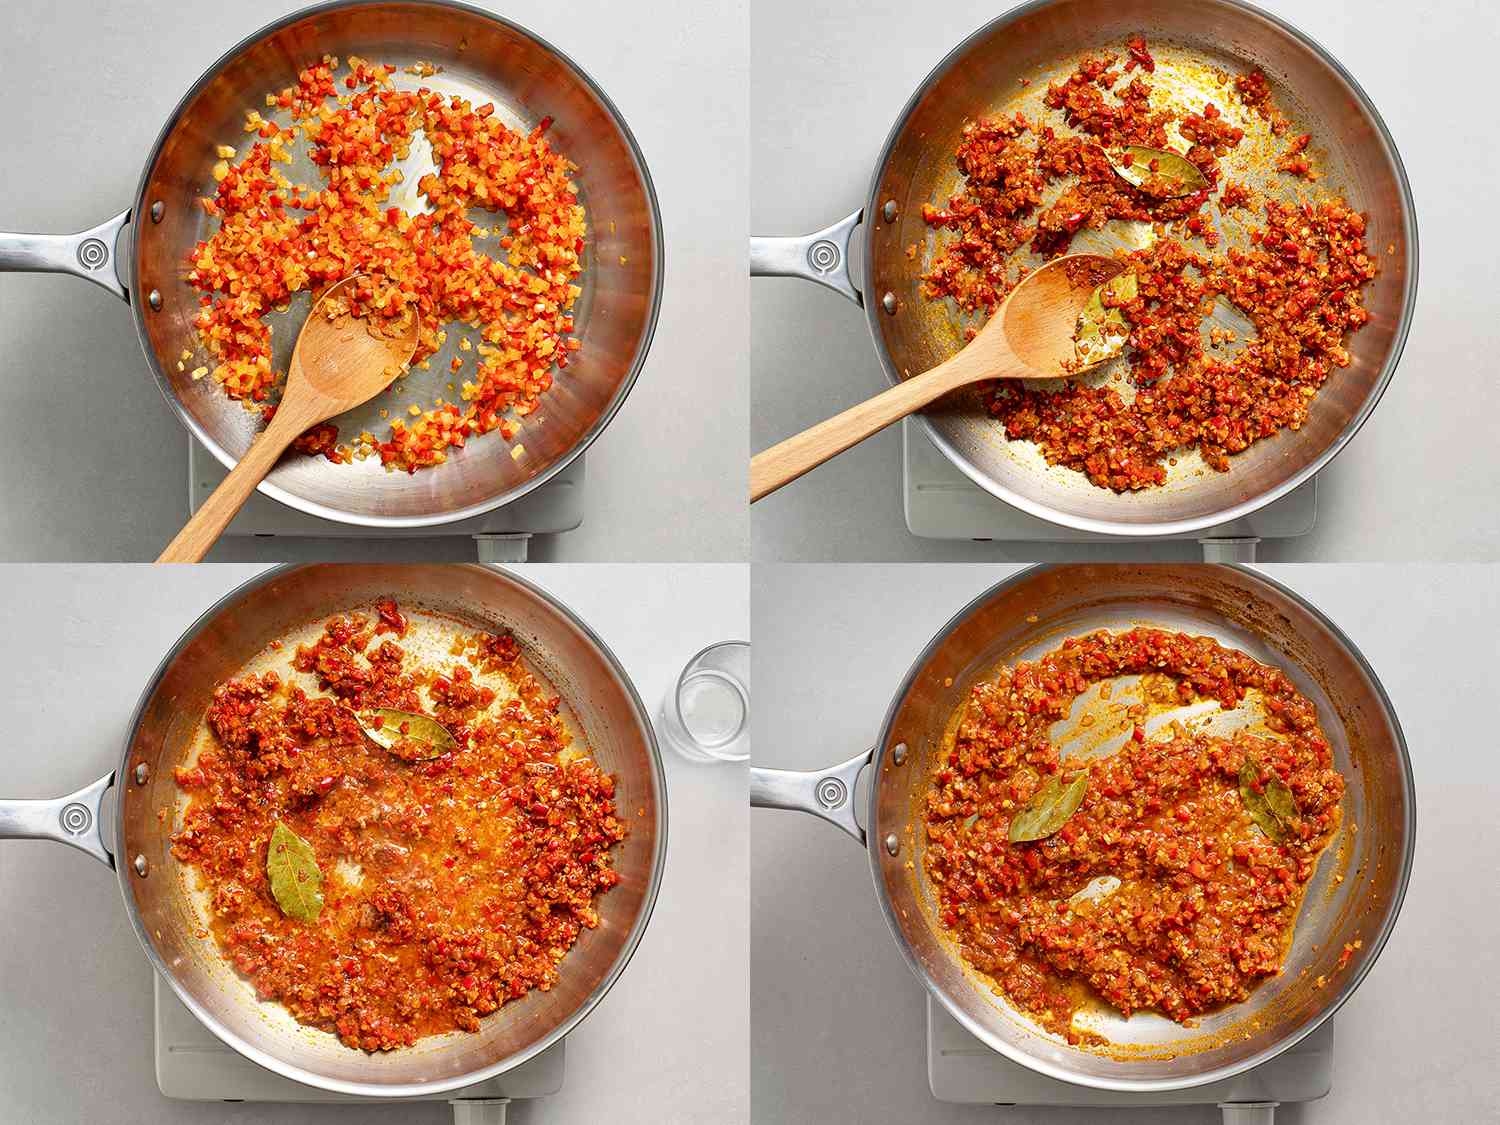 A collage showing the sofrito ingredients being cooked down in a stainless steel pan.